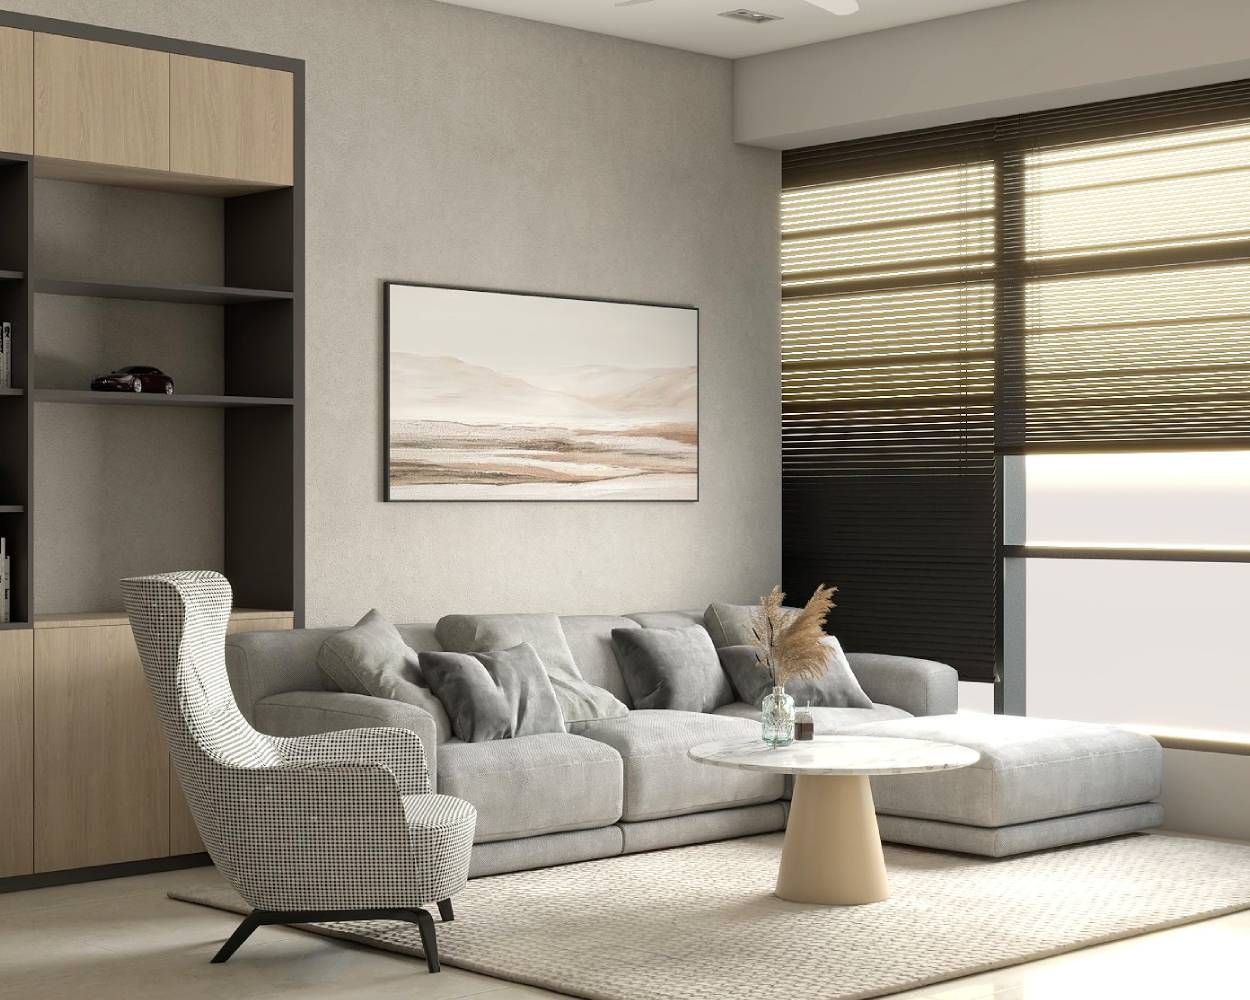 Modern Living Room Design With Grey Sectional Sofa And Open Storage Unit